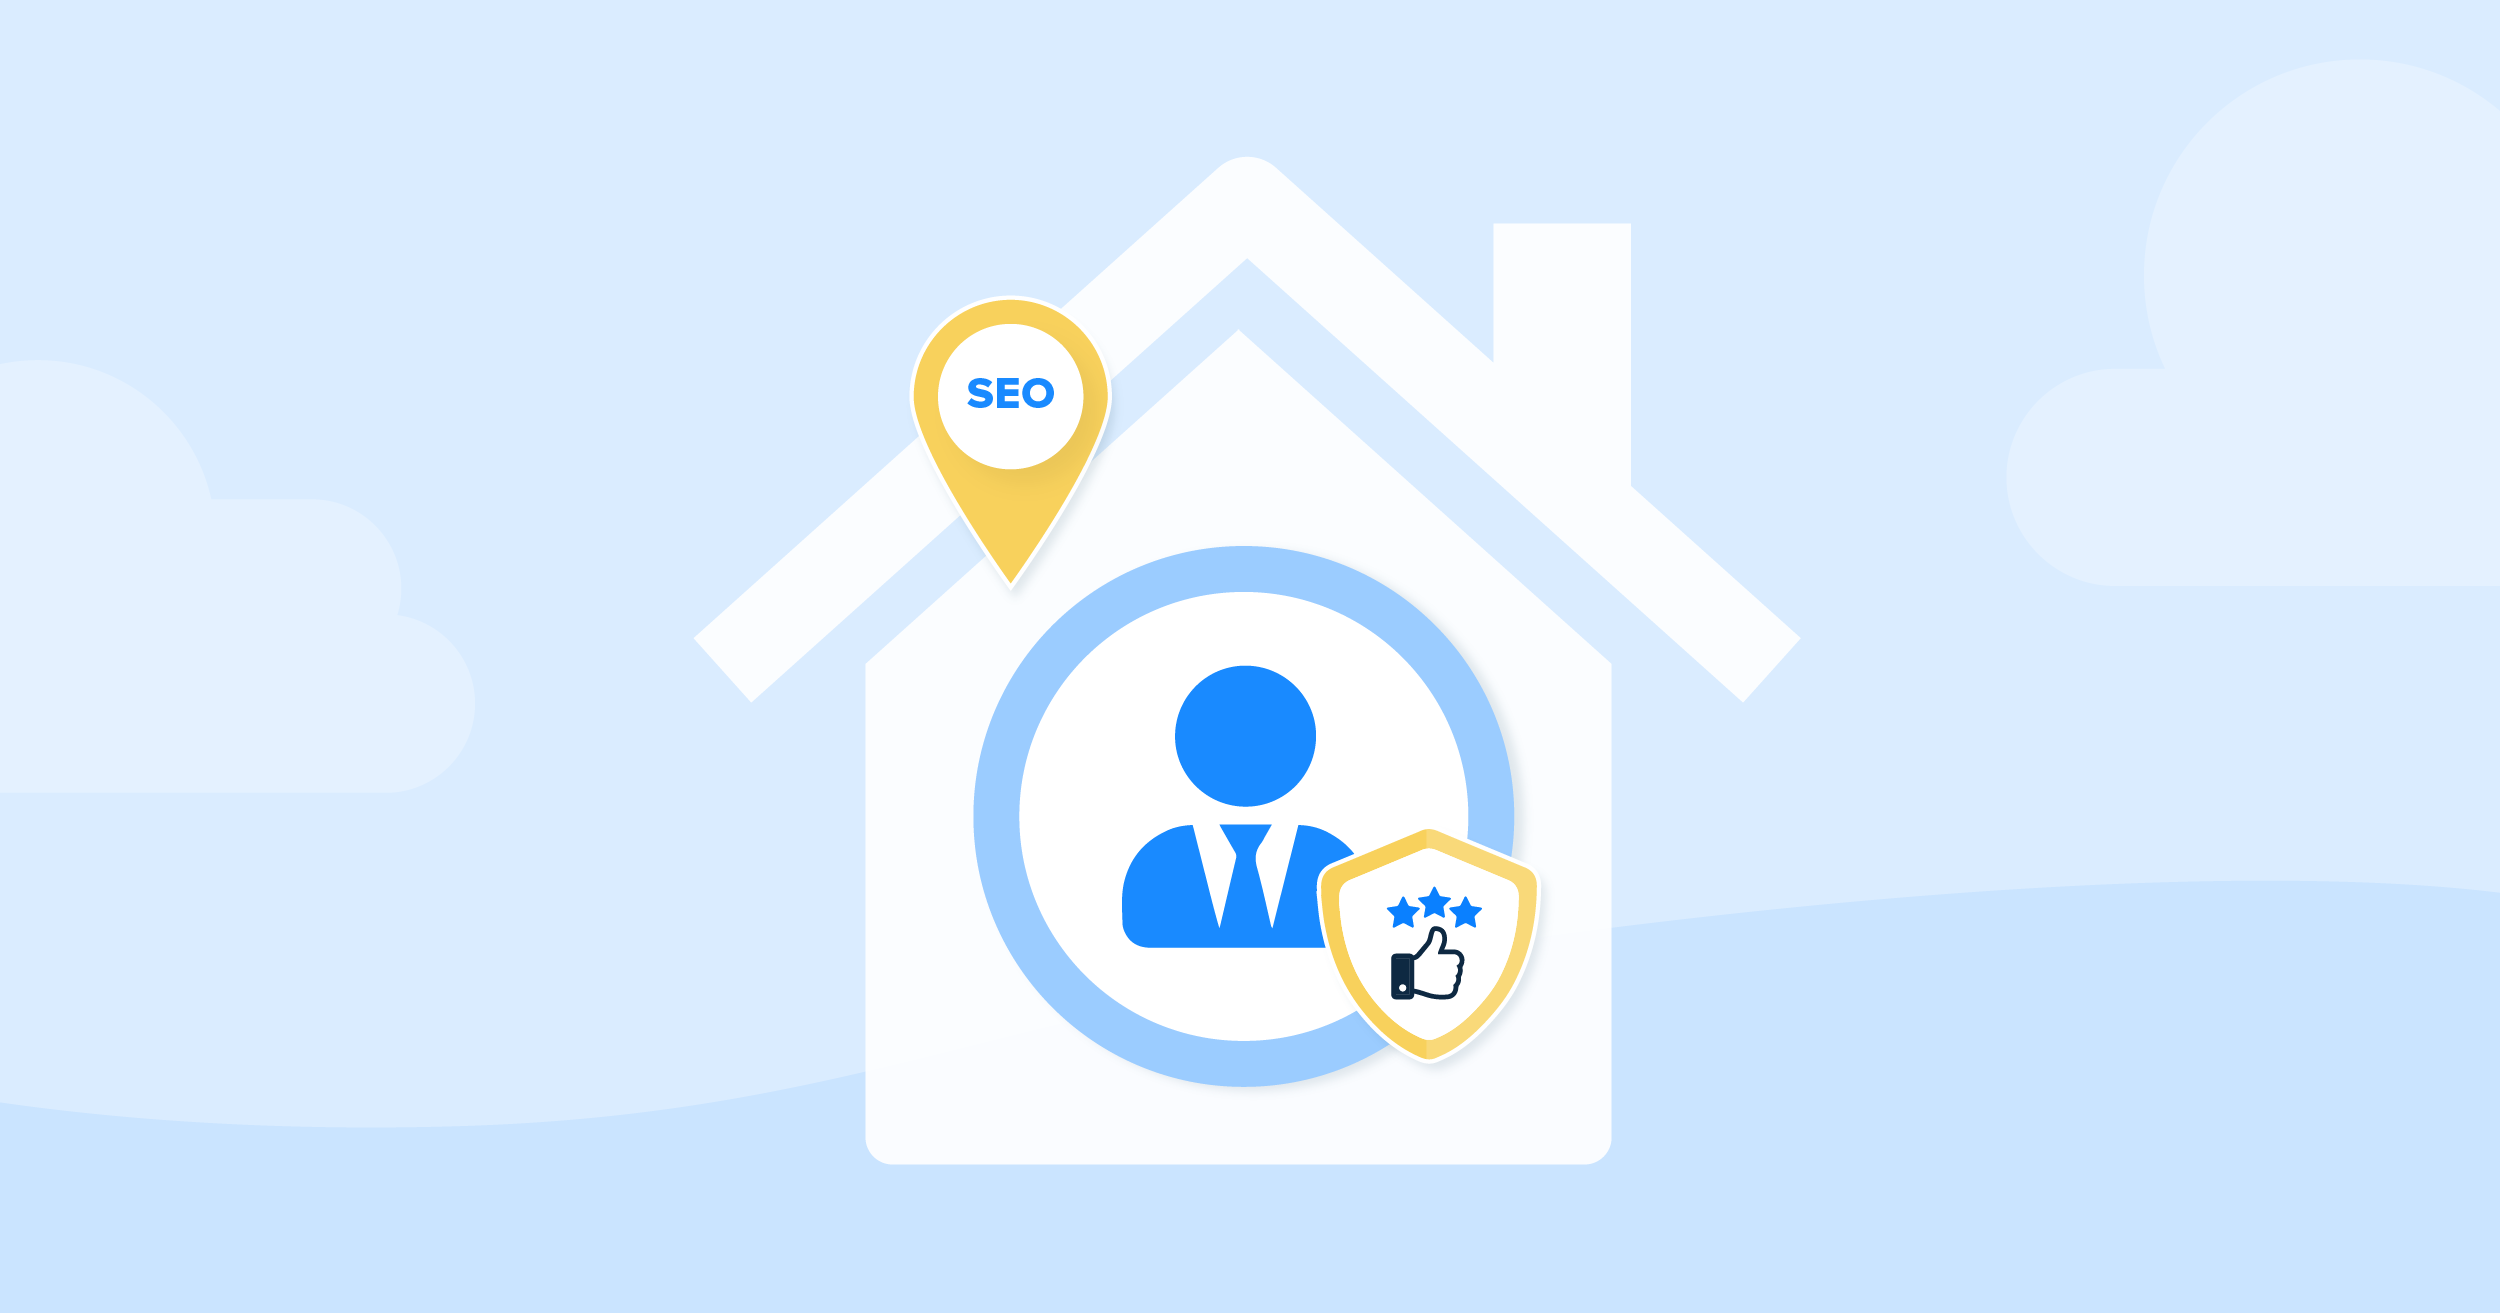 SEO Services For Real Estate